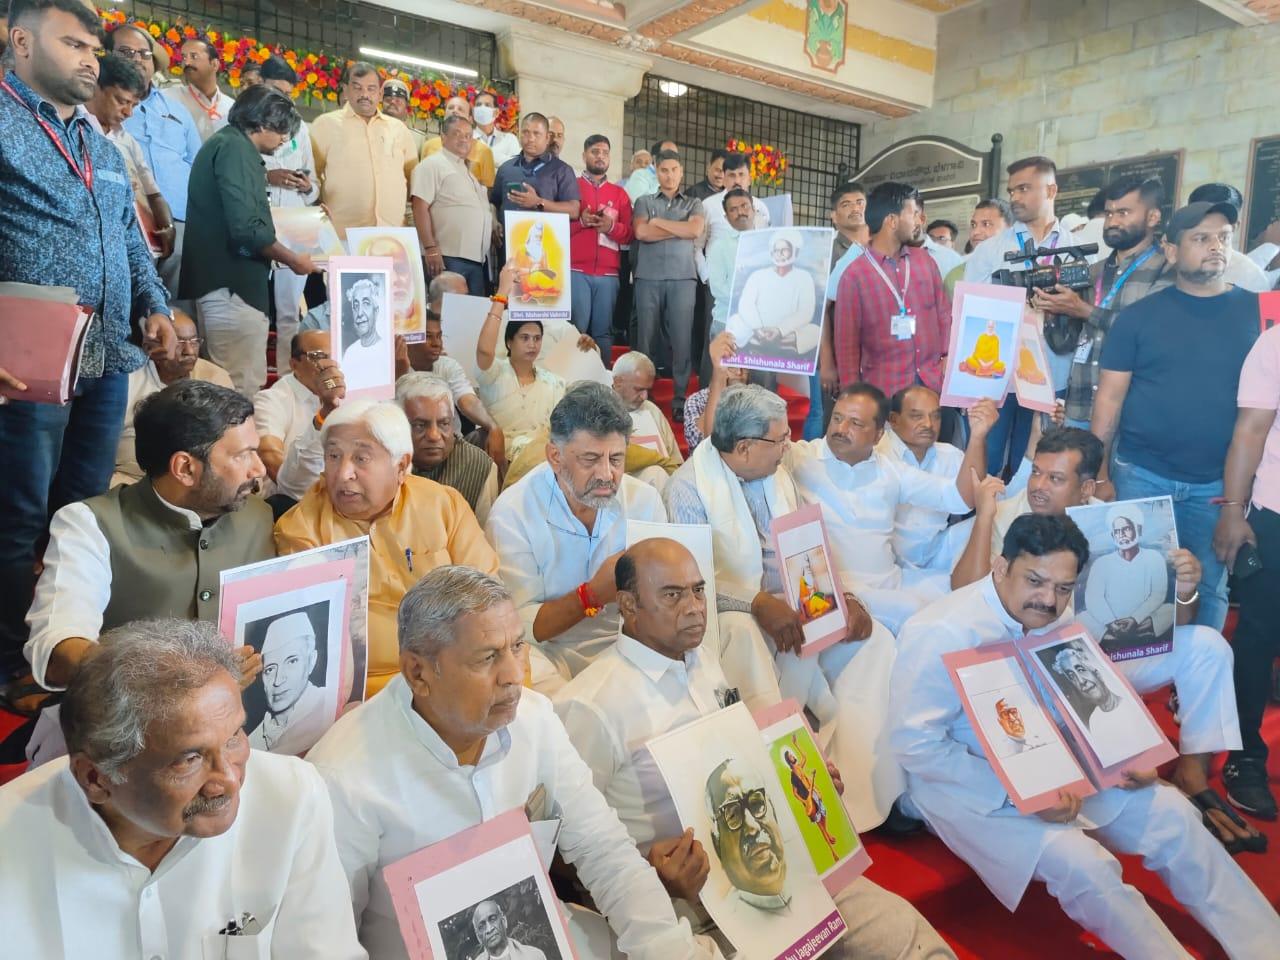 Opposition leaders - including former chief minister and the current Leader of the Opposition, Siddaramaiah, were among those who staged a demonstration and sat outside the assembly on the steps to protest the ruling Basavaraj Bommai government's decision to unveil a portrait of Veer Savarkar in the assembly (Pic/Official Twitter handle of Karnataka Congress)